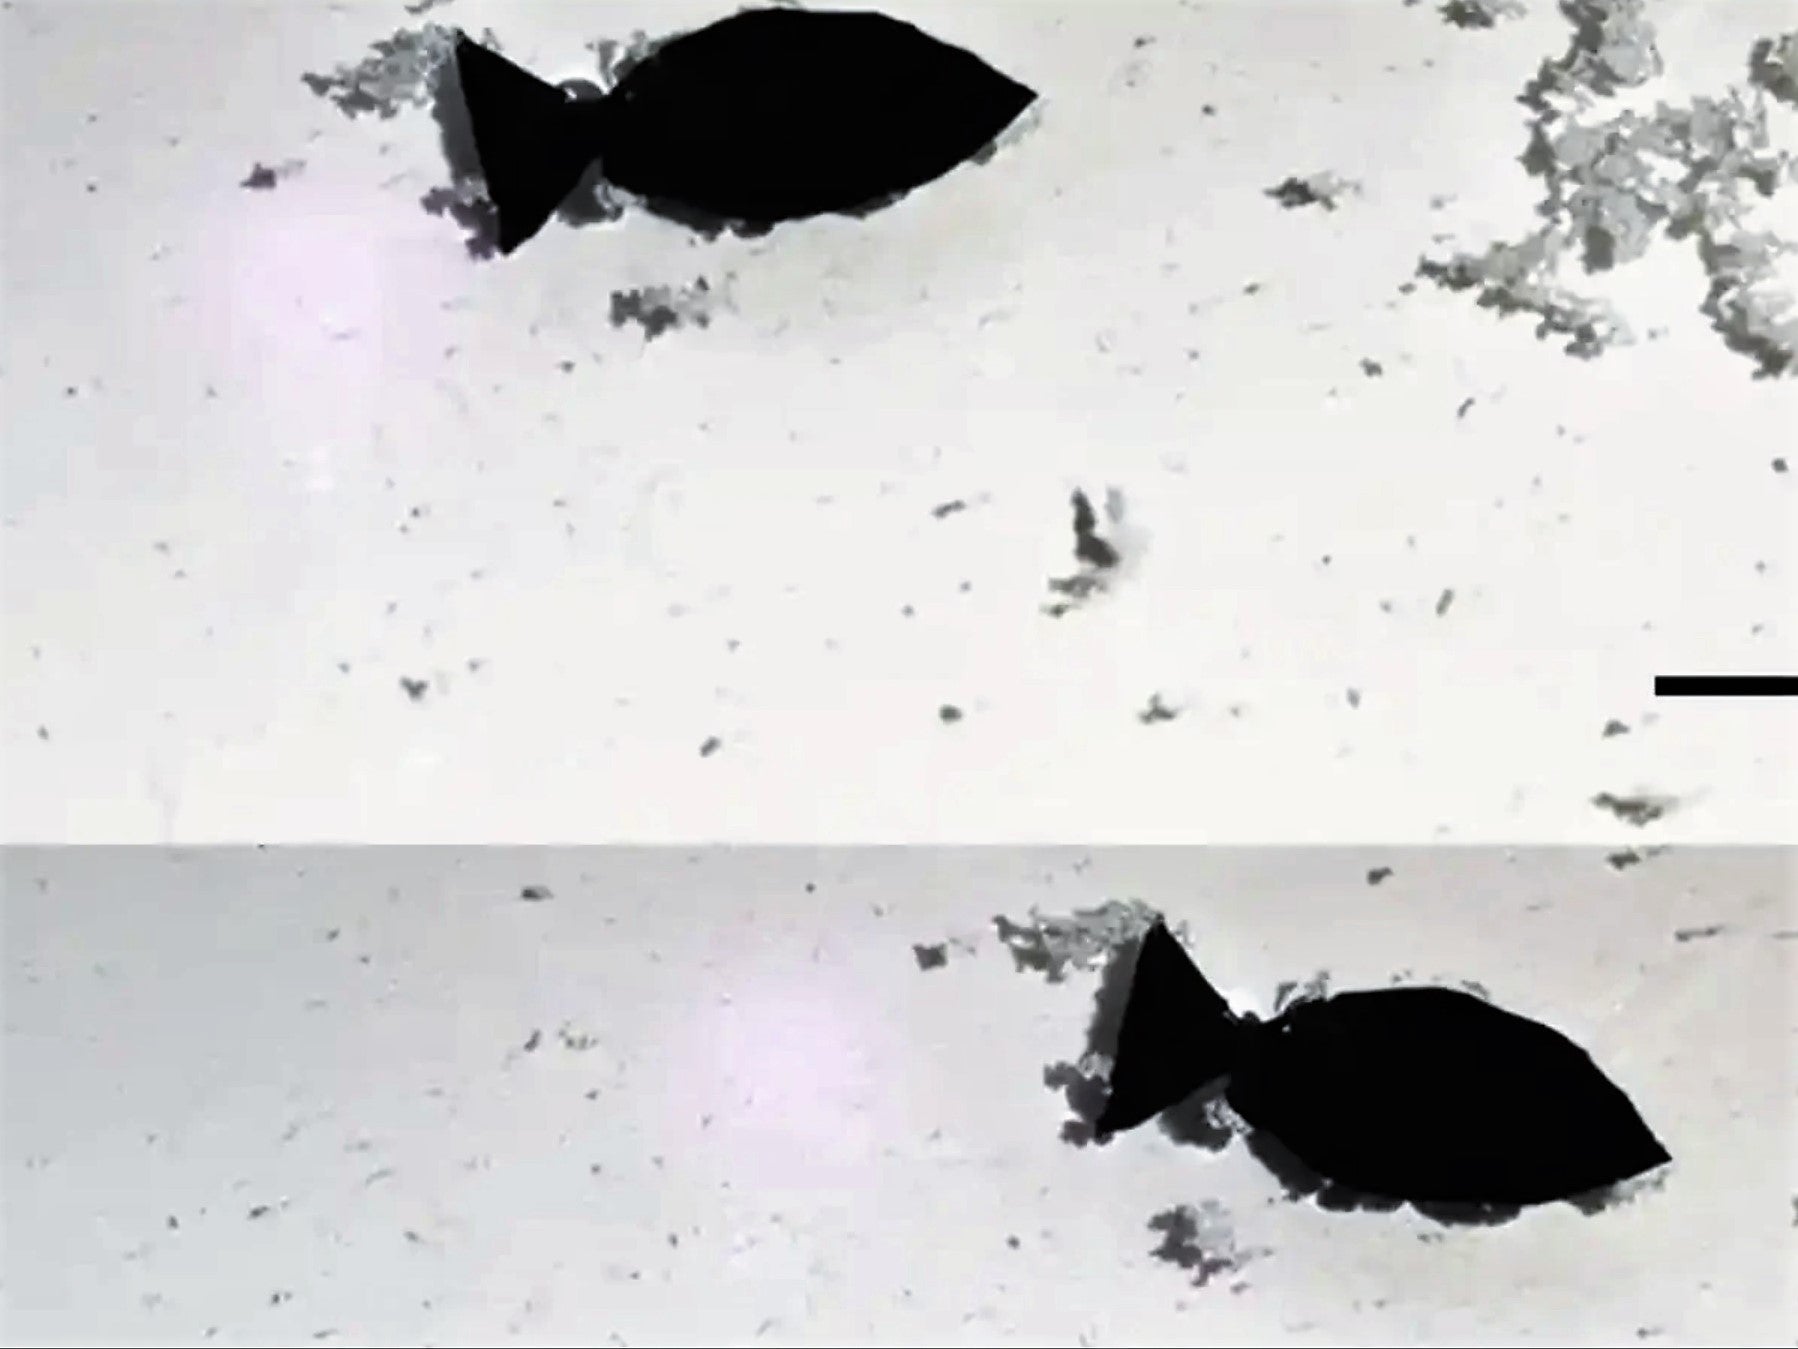 A fish-shaped robot controlled by near-infrared light to absorb microplastics